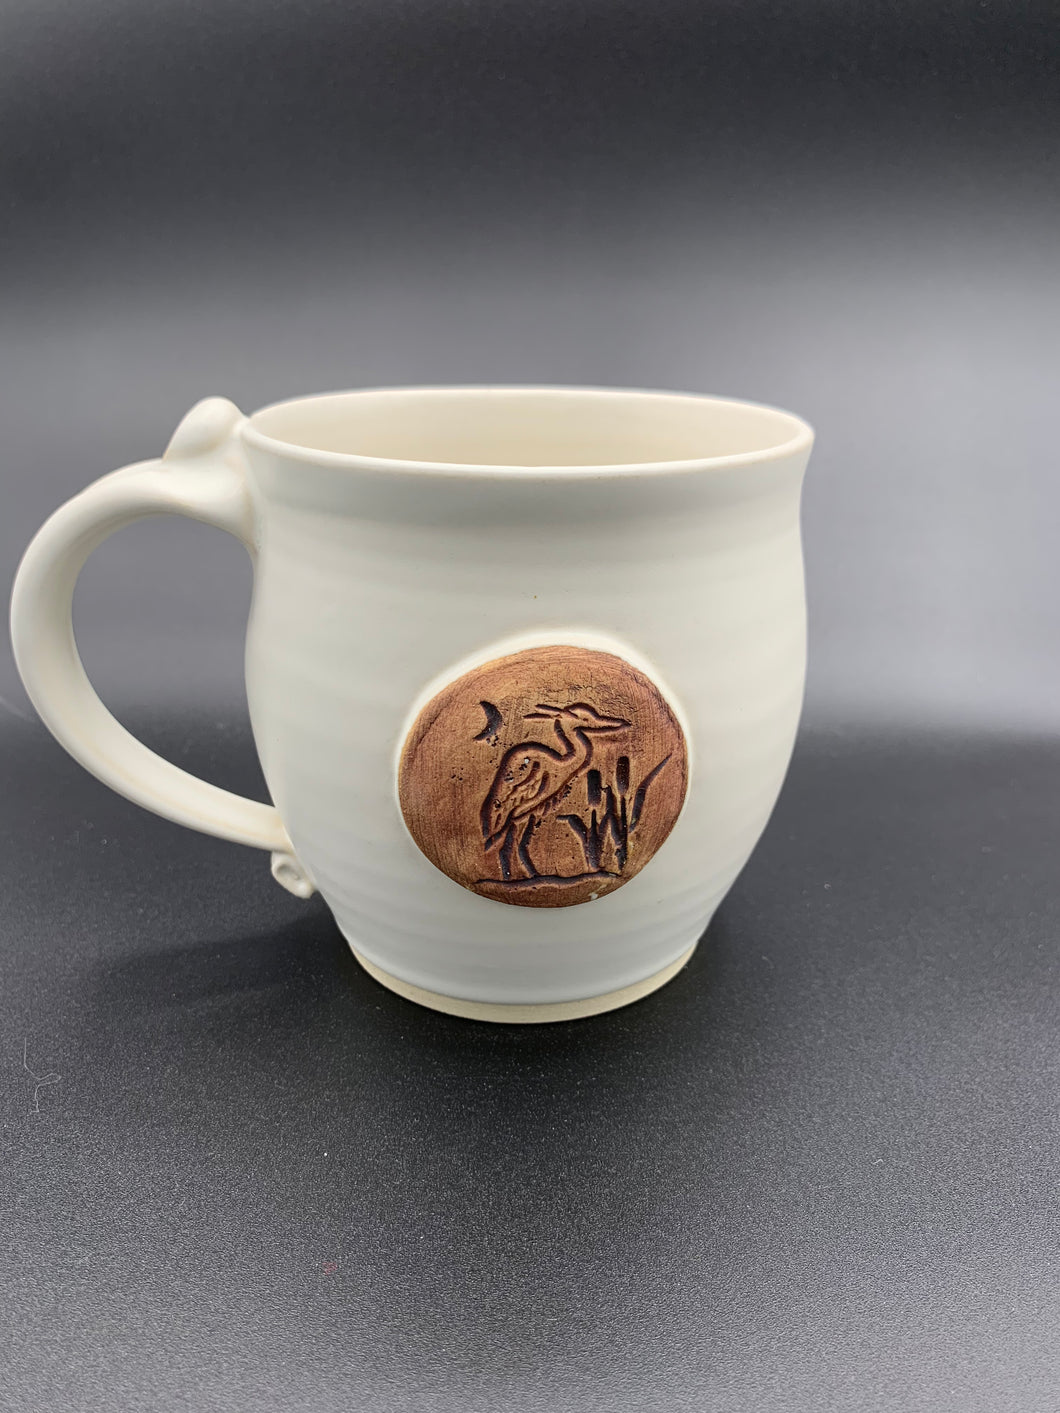 Latte/soup mug - fishing during a crescent moon, blue heron and bullrushes.